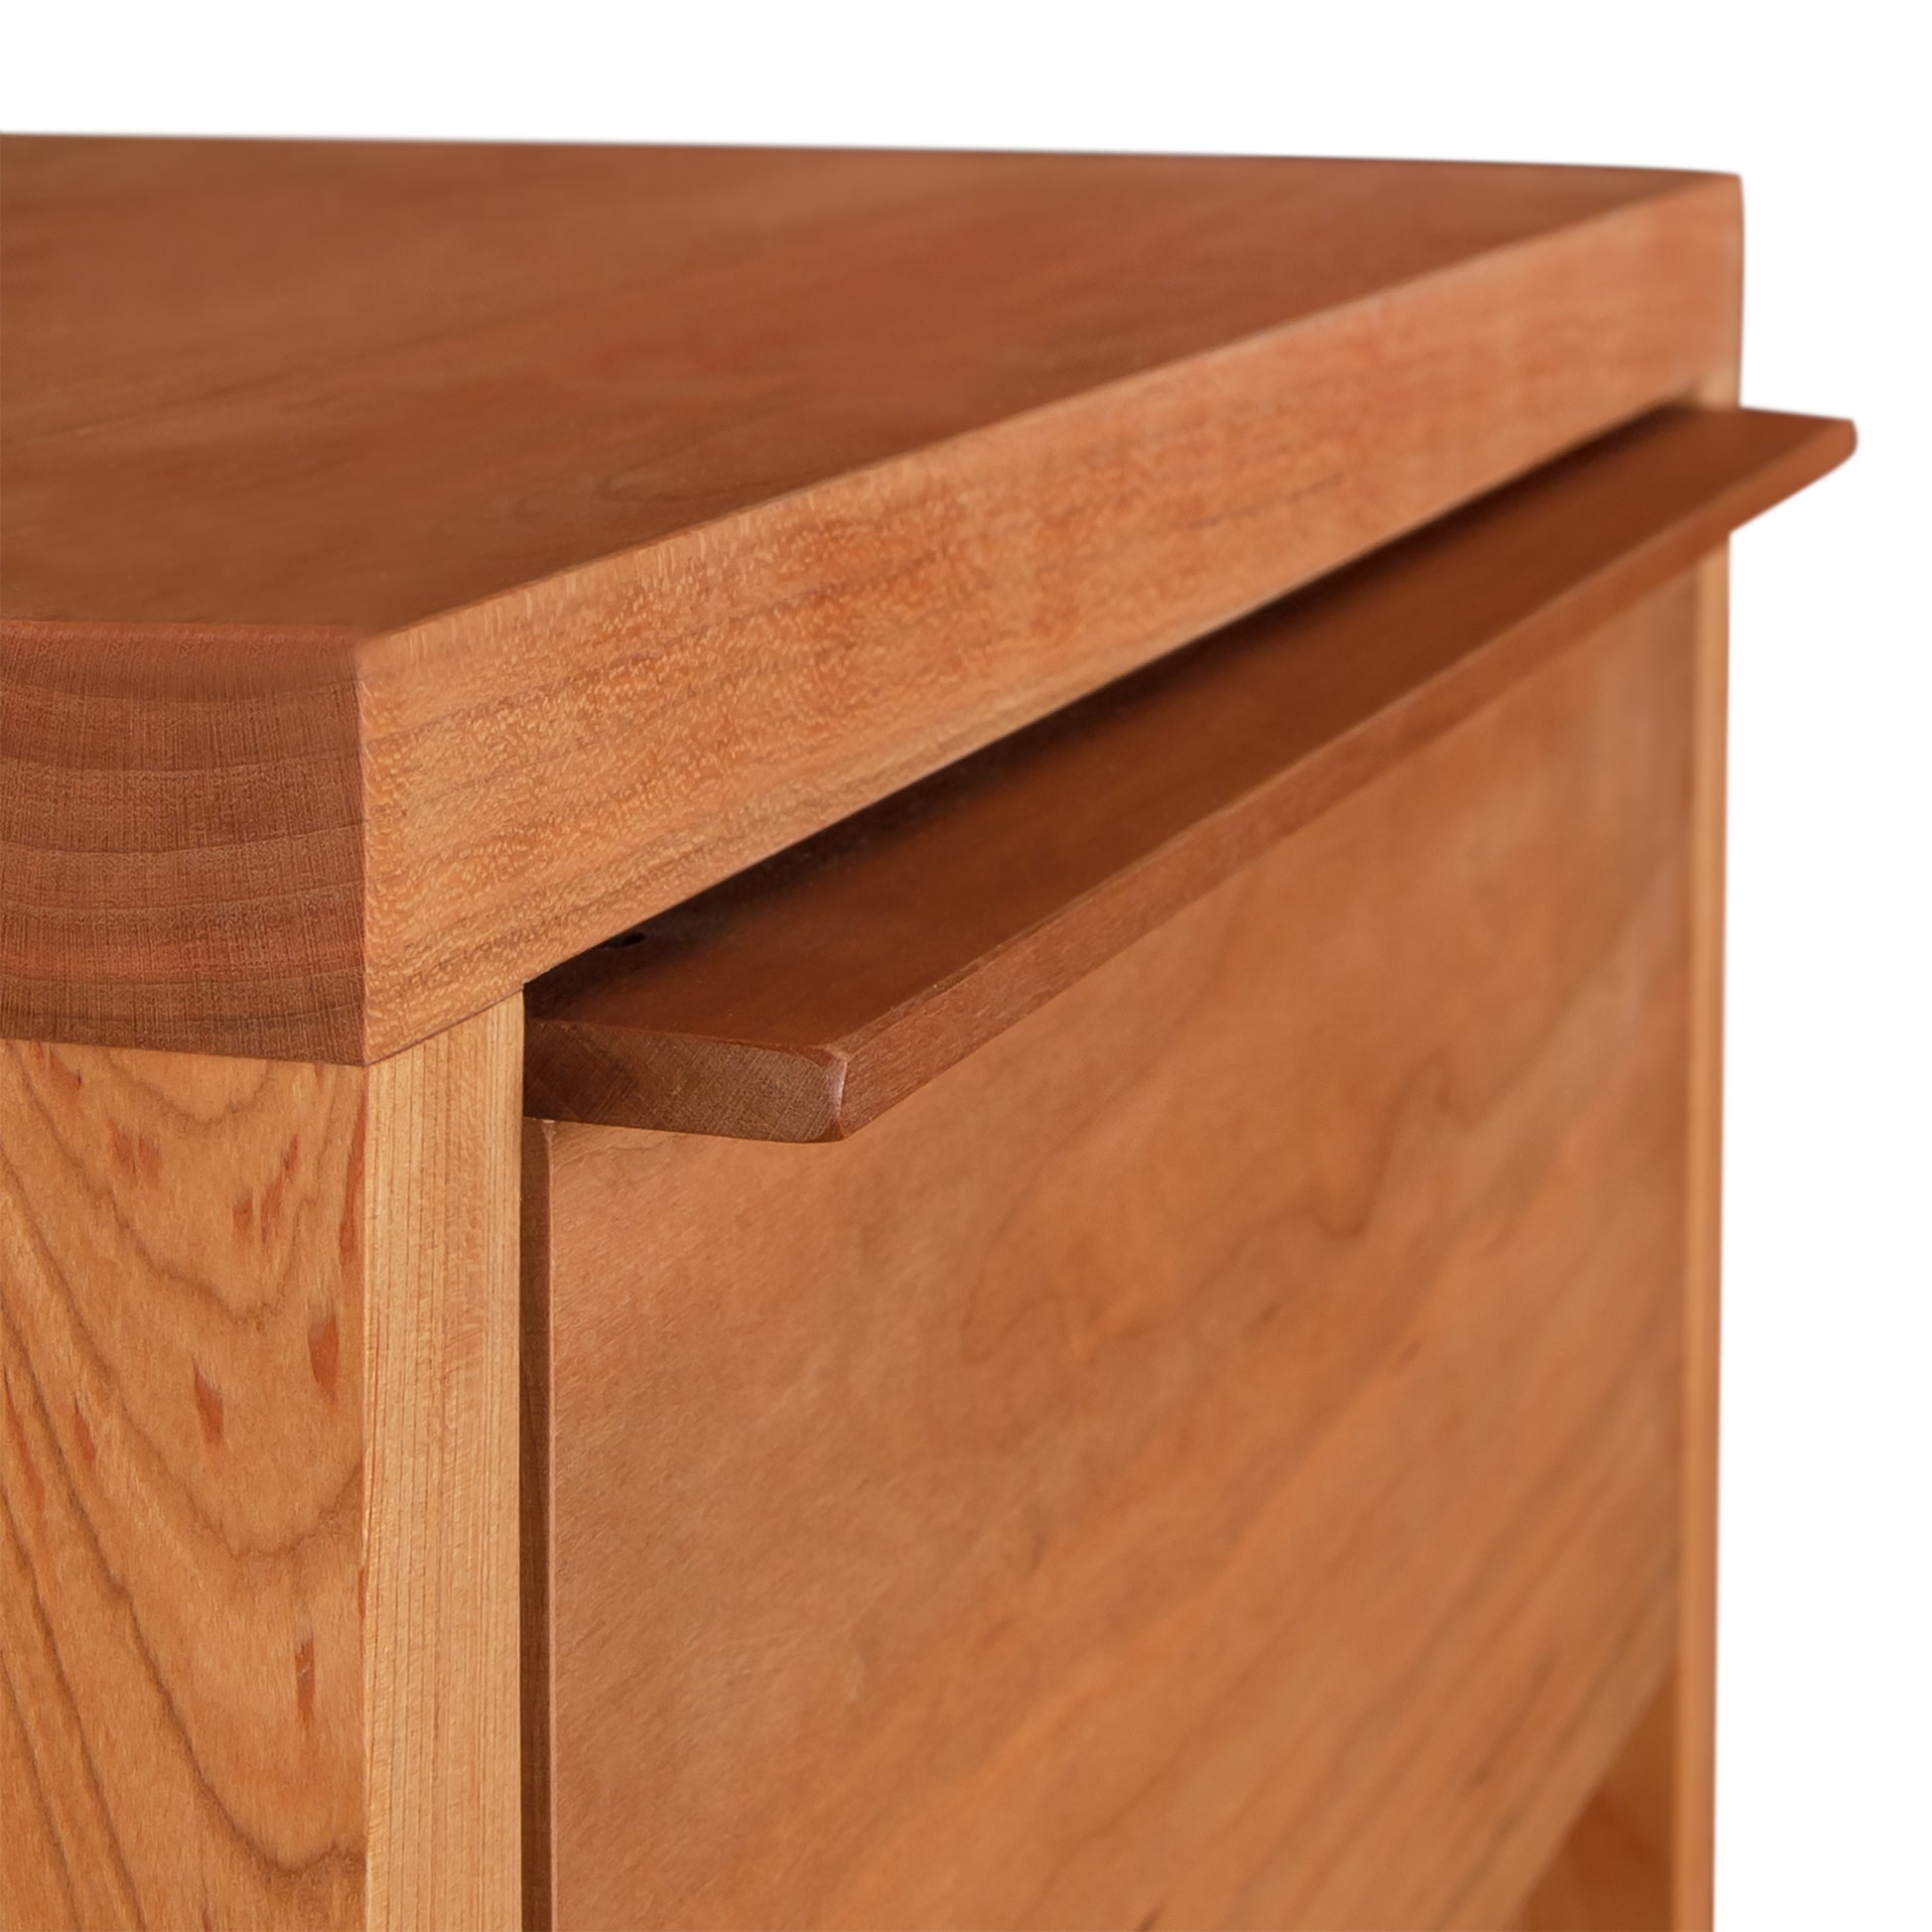 Close-up of a wooden drawer partially open, showcasing its handle and wood grain texture of the Vermont Furniture Designs Kipling 1-Drawer Enclosed Shelf Nightstand.